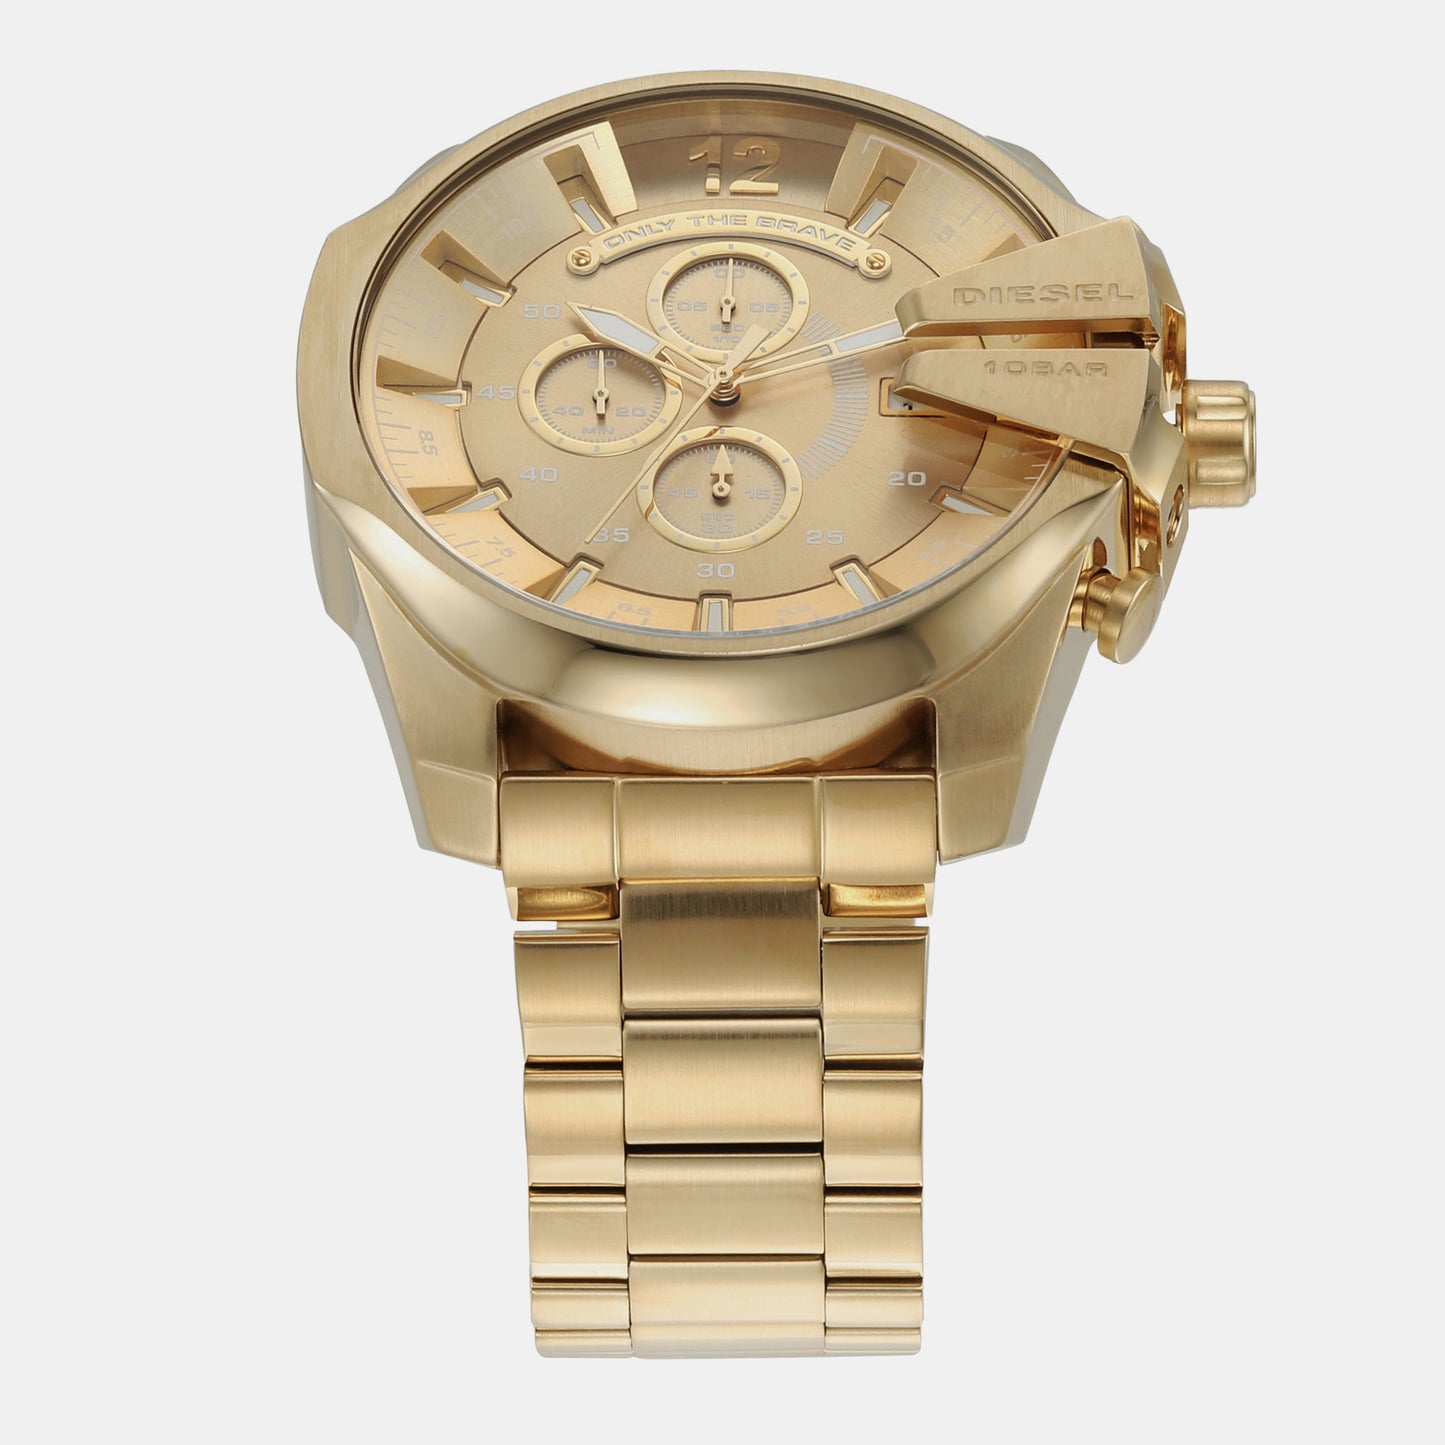 Male Gold Chronograph Stainless Steel Watch DZ4360